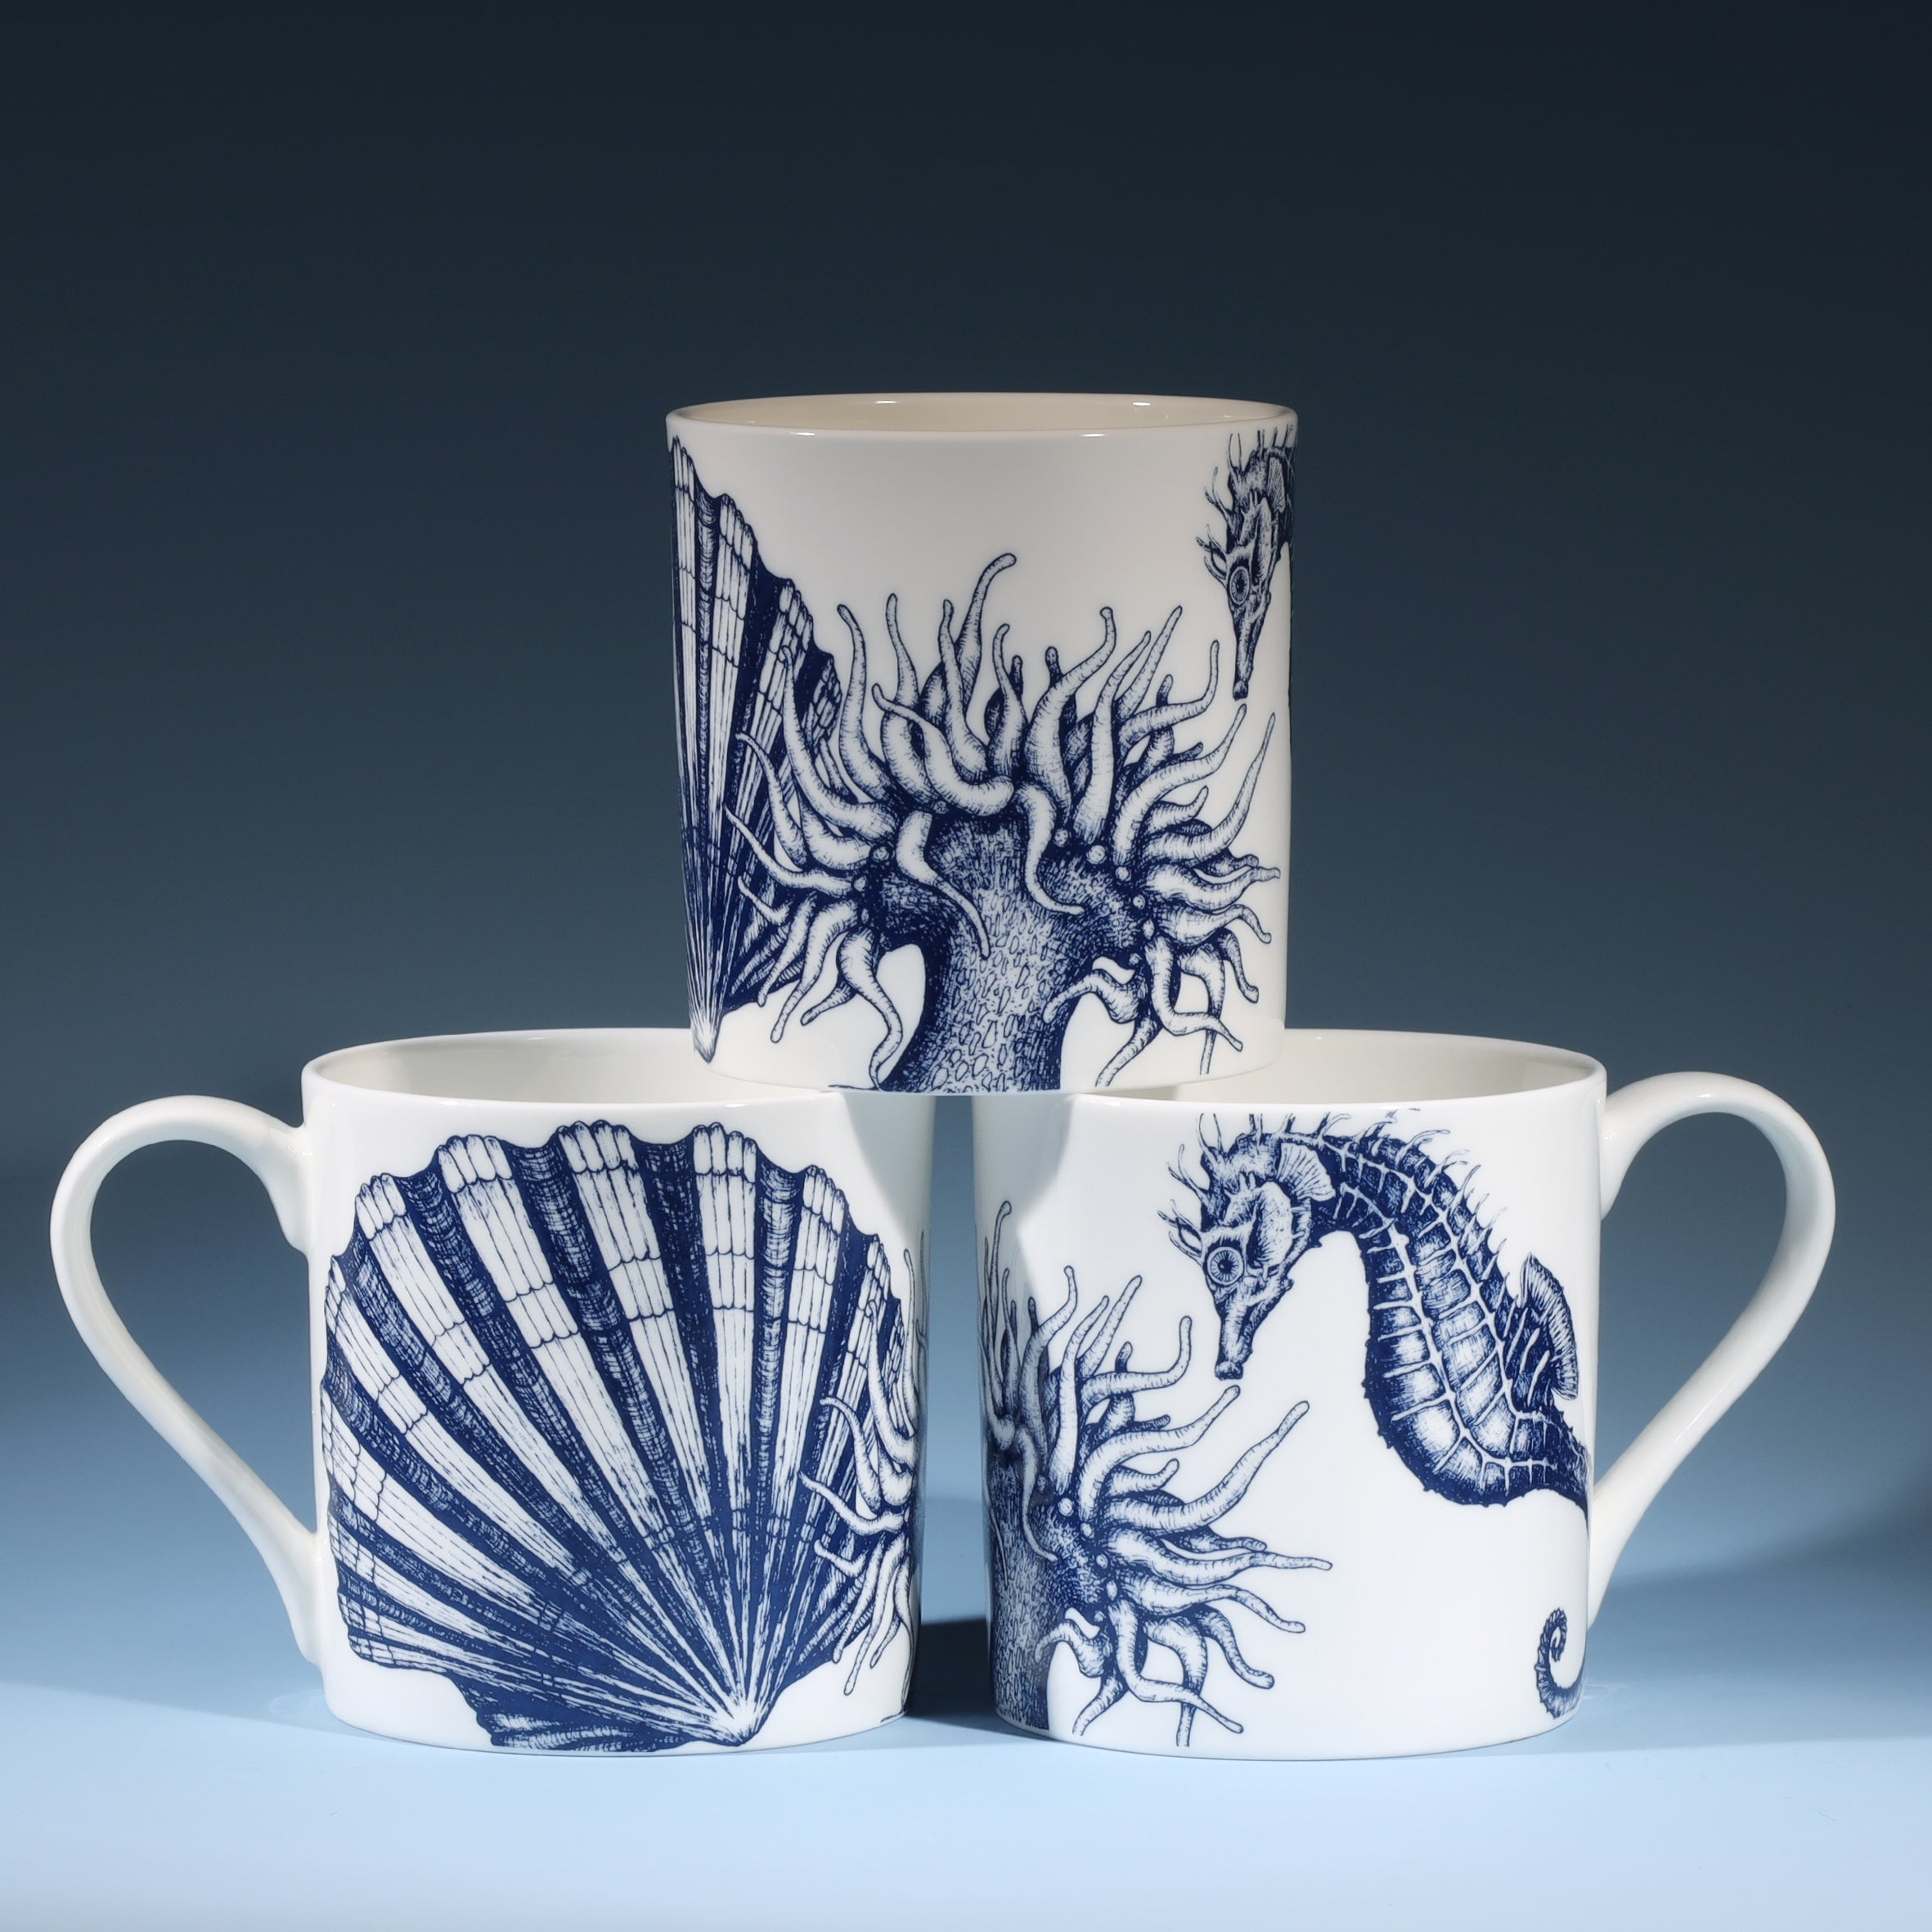 The photo shows Bone china white mug featuring  hand drawn seahorse,scallop shell and anemone design in classic Navy.Three different views of the mug